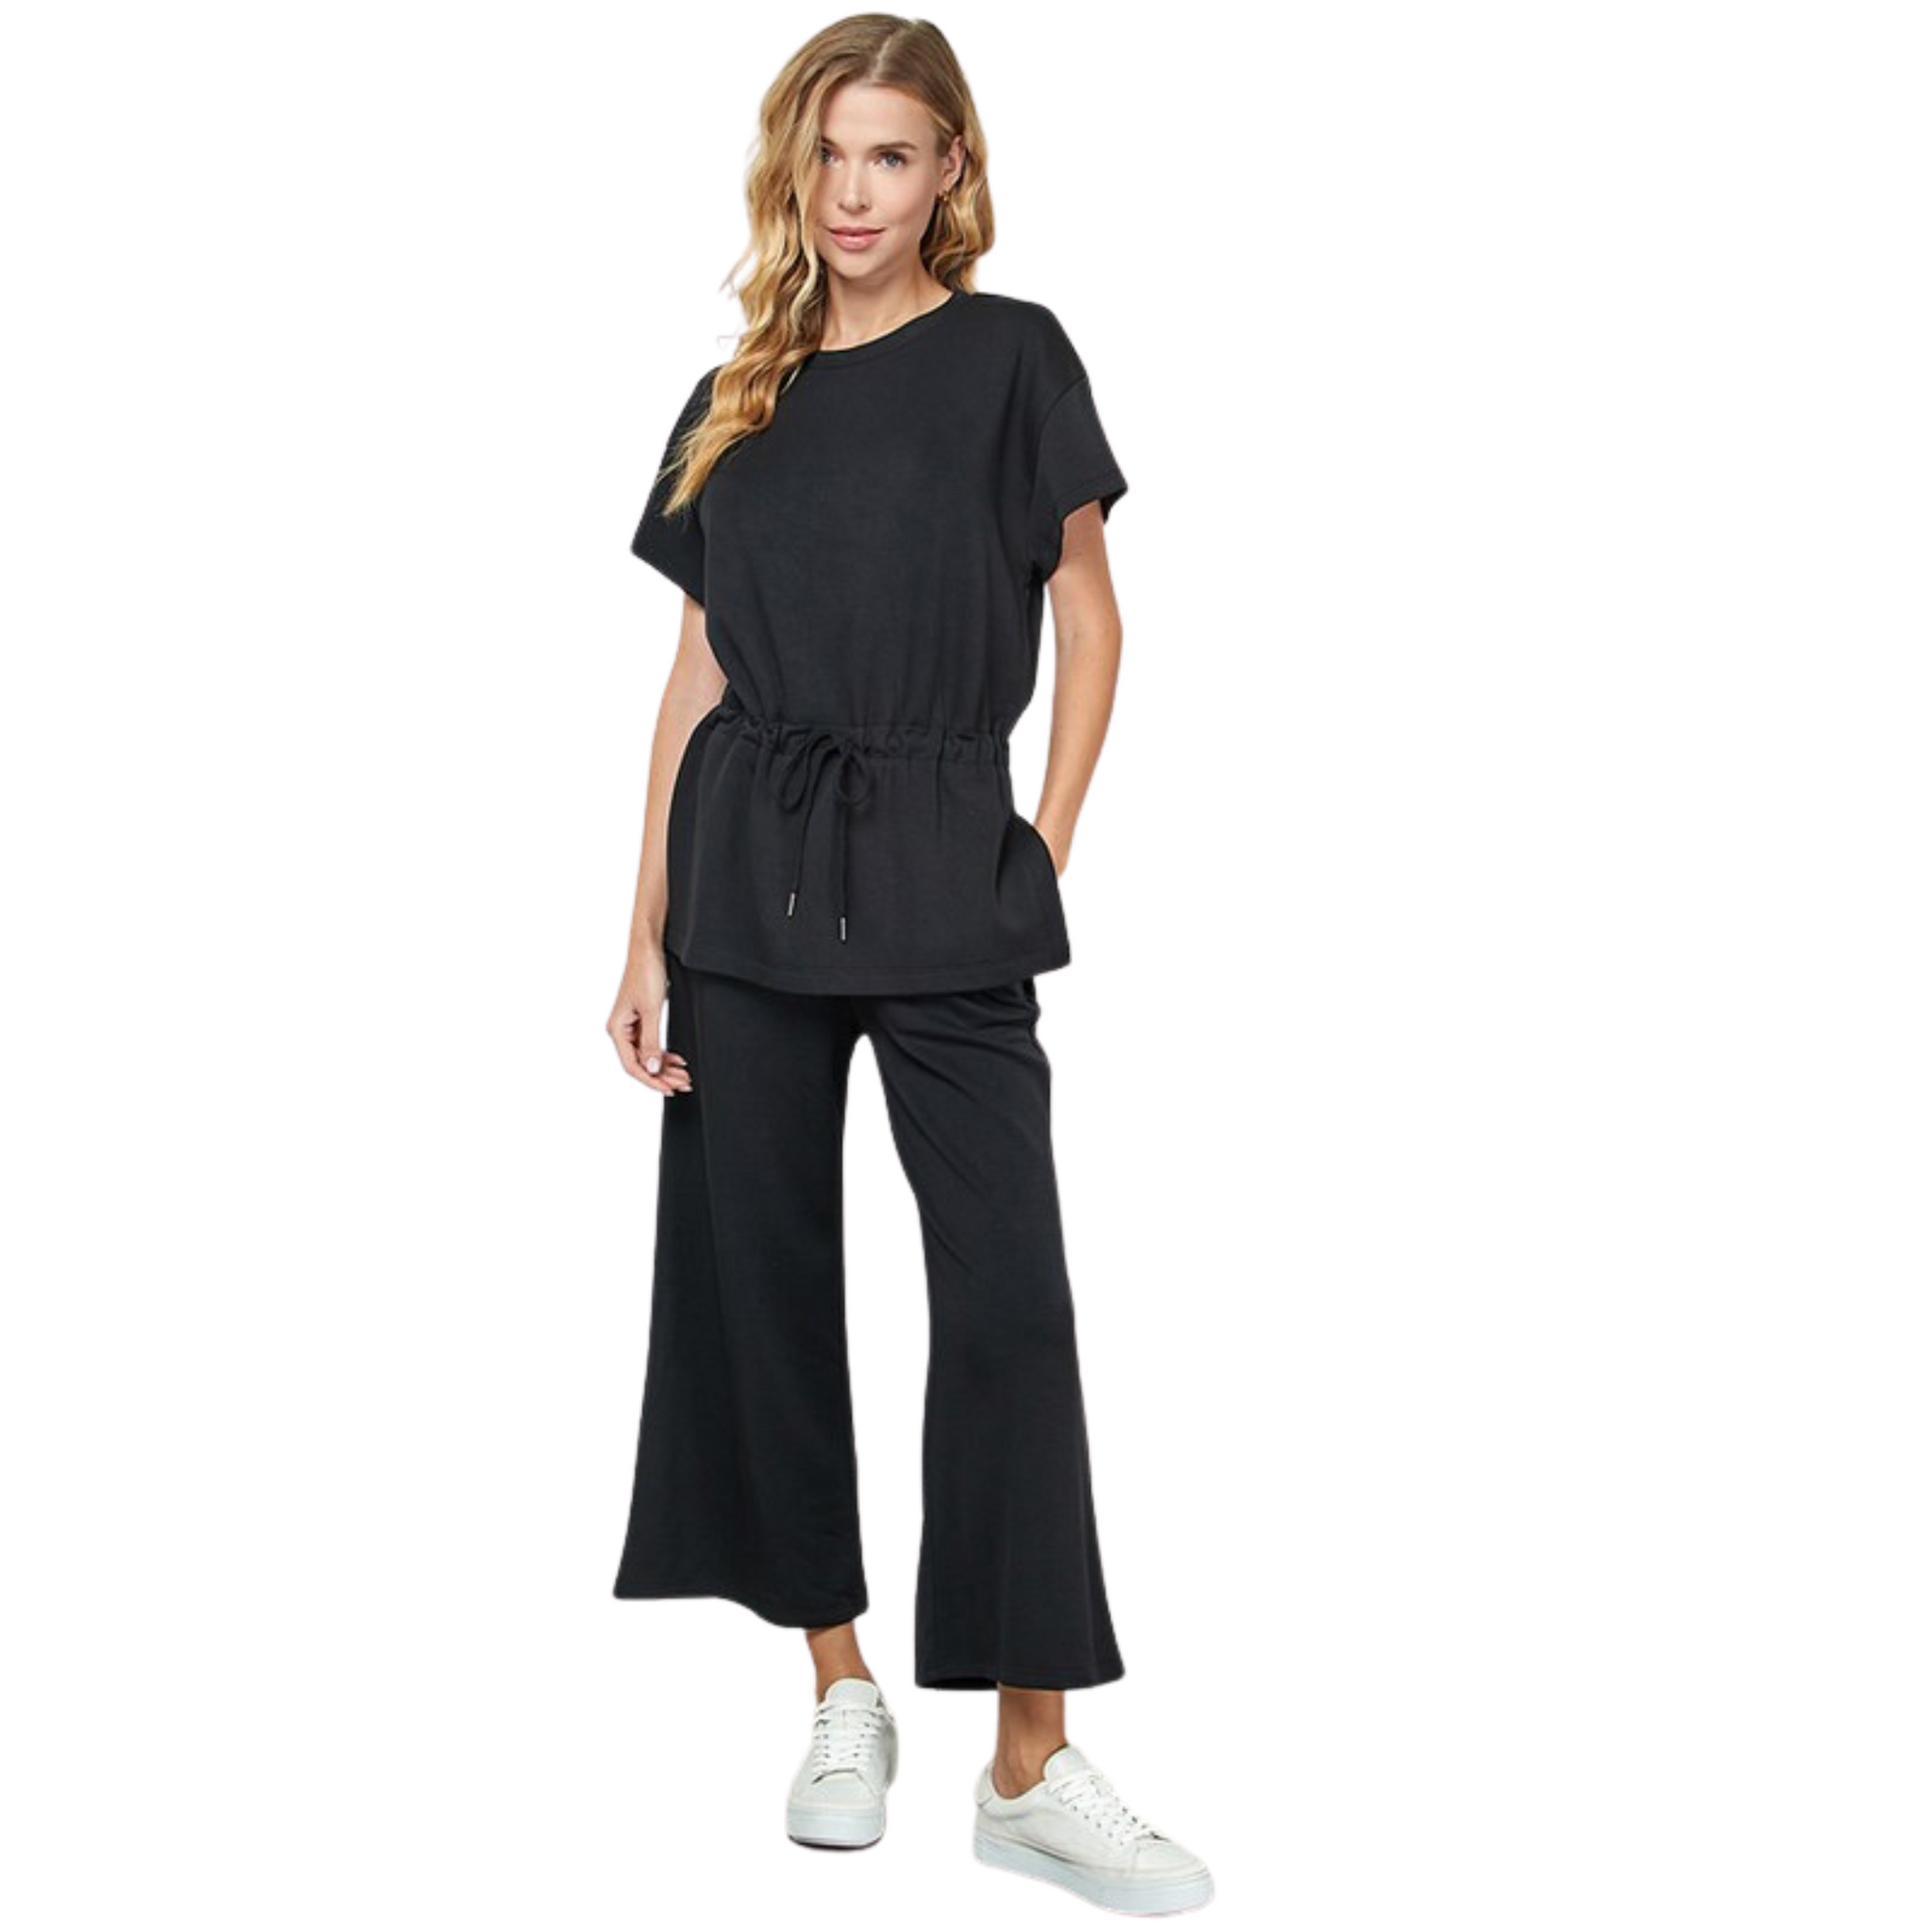 Our Plus size Cropped Wide Leg Pants are perfect for any occasion. Featuring a classic black color and super soft fabric, these pants have a flattering high waist and wide leg, providing a flexible, comfortable fit. They are cropped just above the ankle for a modern look.